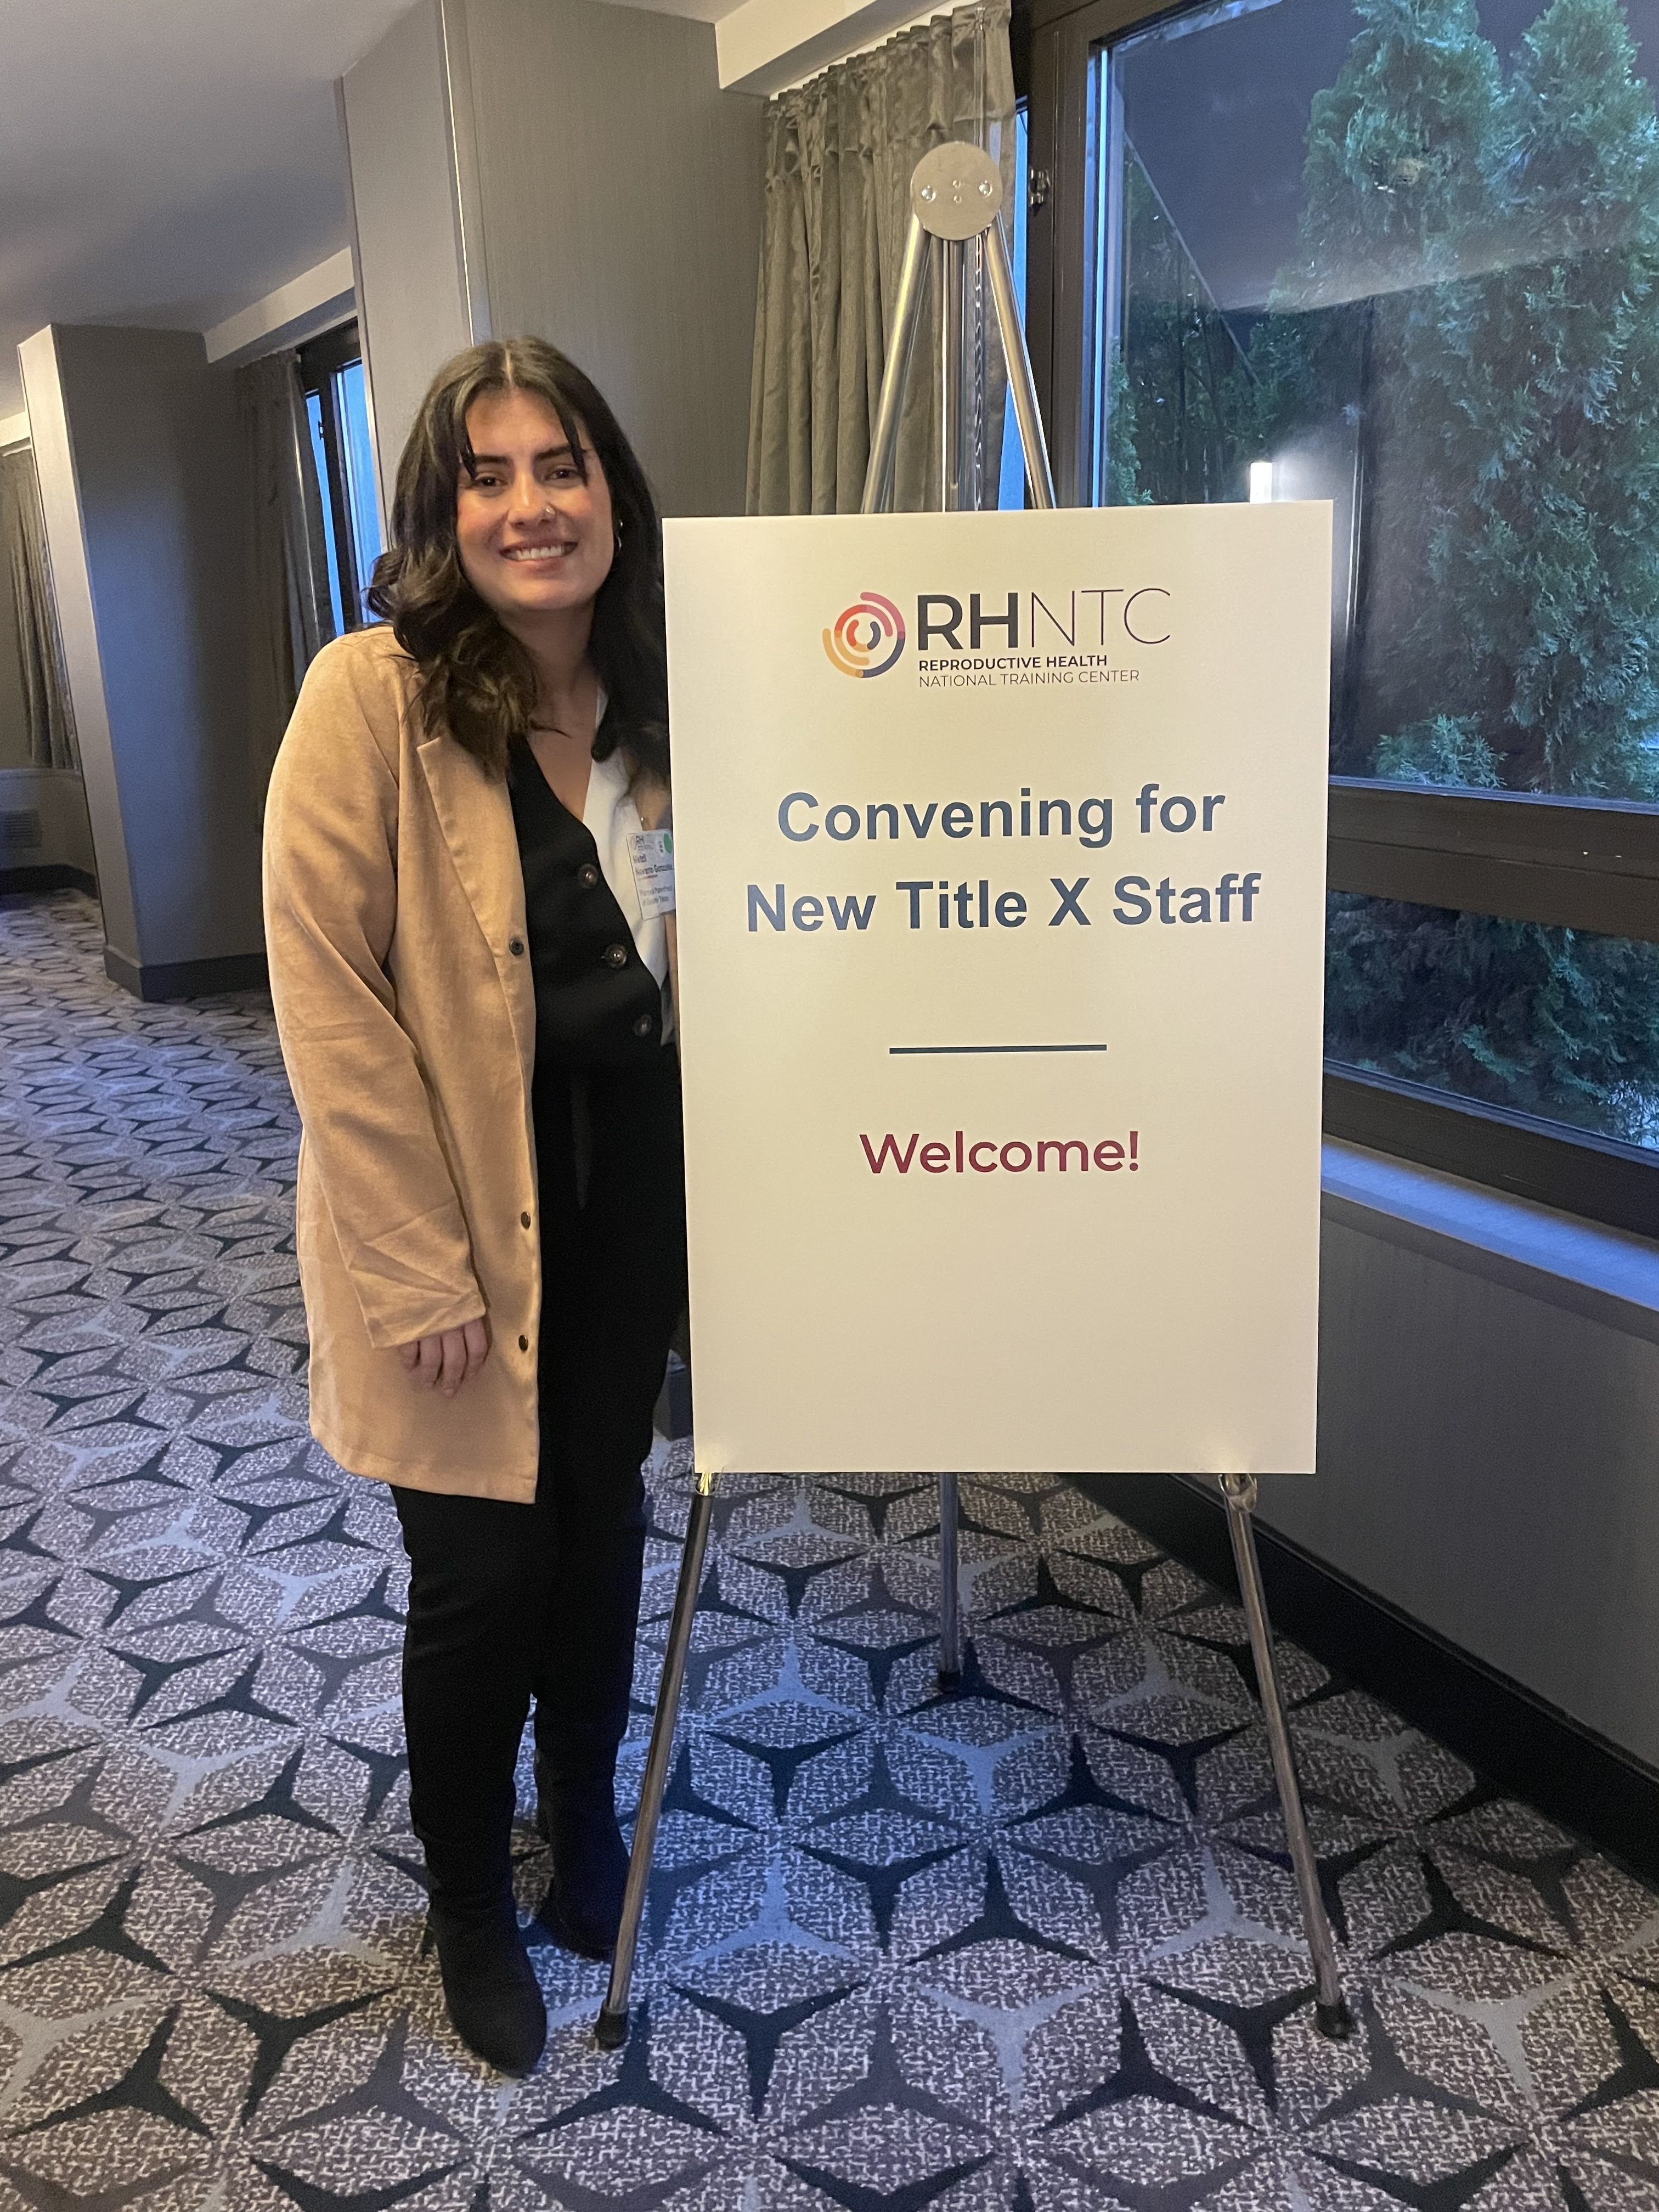 Image of Metzli Navarro from Planned Parenthood of Texas, standing next to an RHNTC welcome sign for the Title X Convening